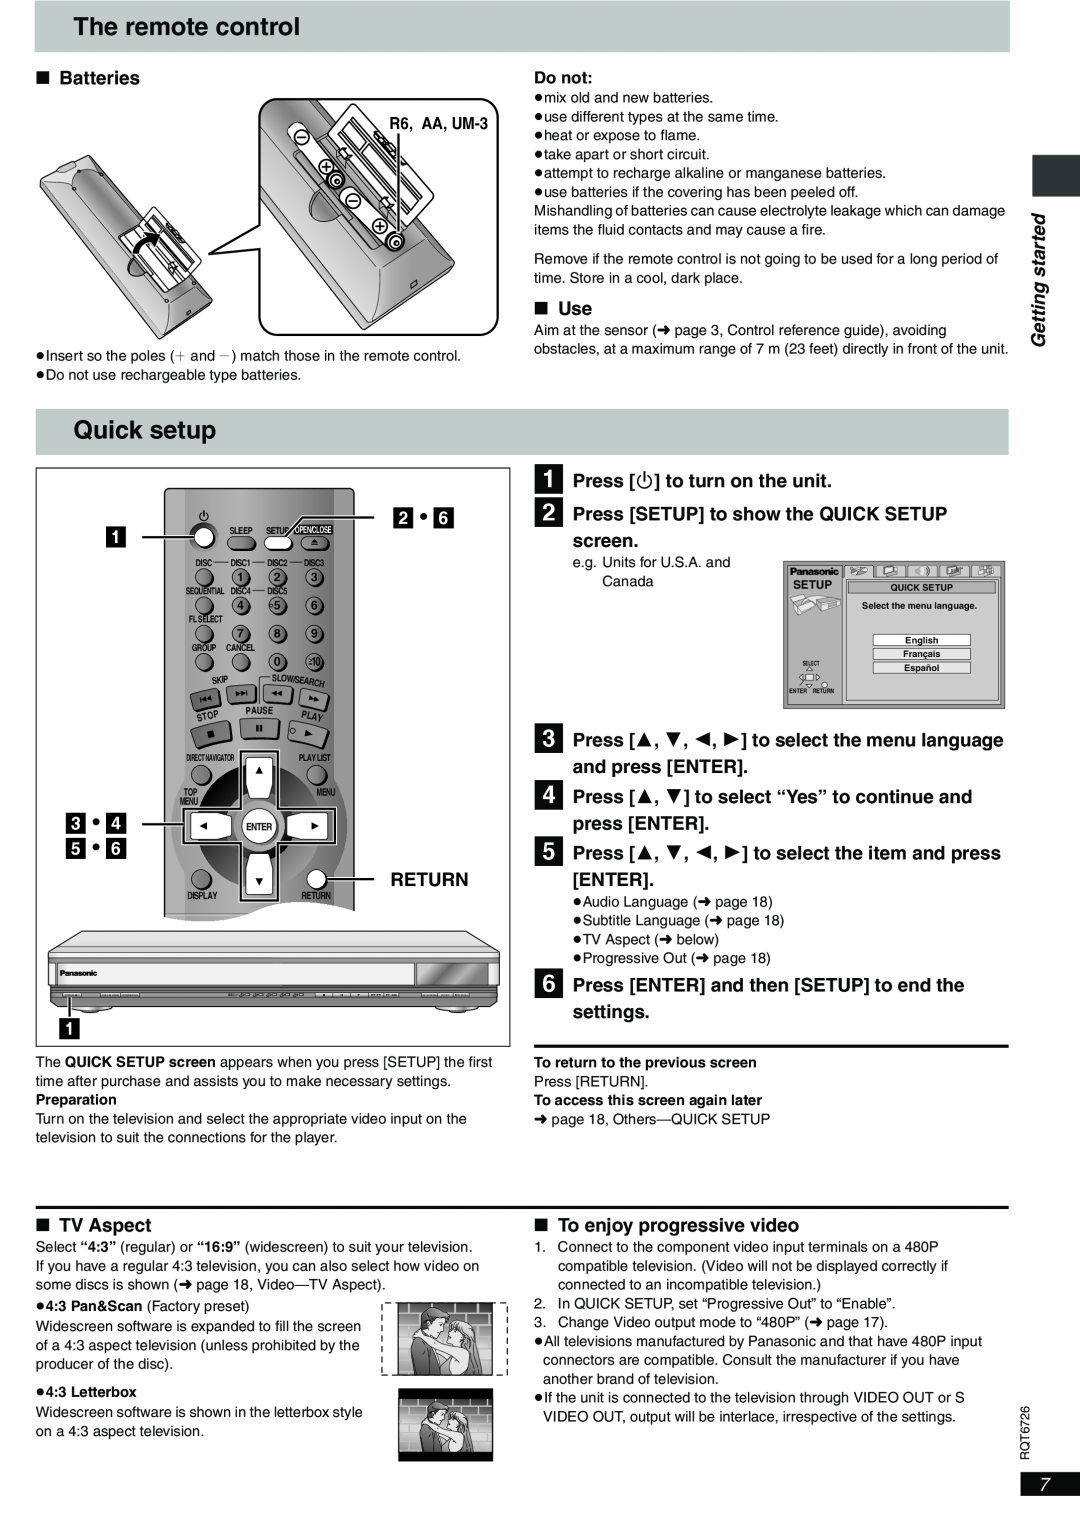 Panasonic DVD-F61 important safety instructions The remote control, Quick setup, Getting started 